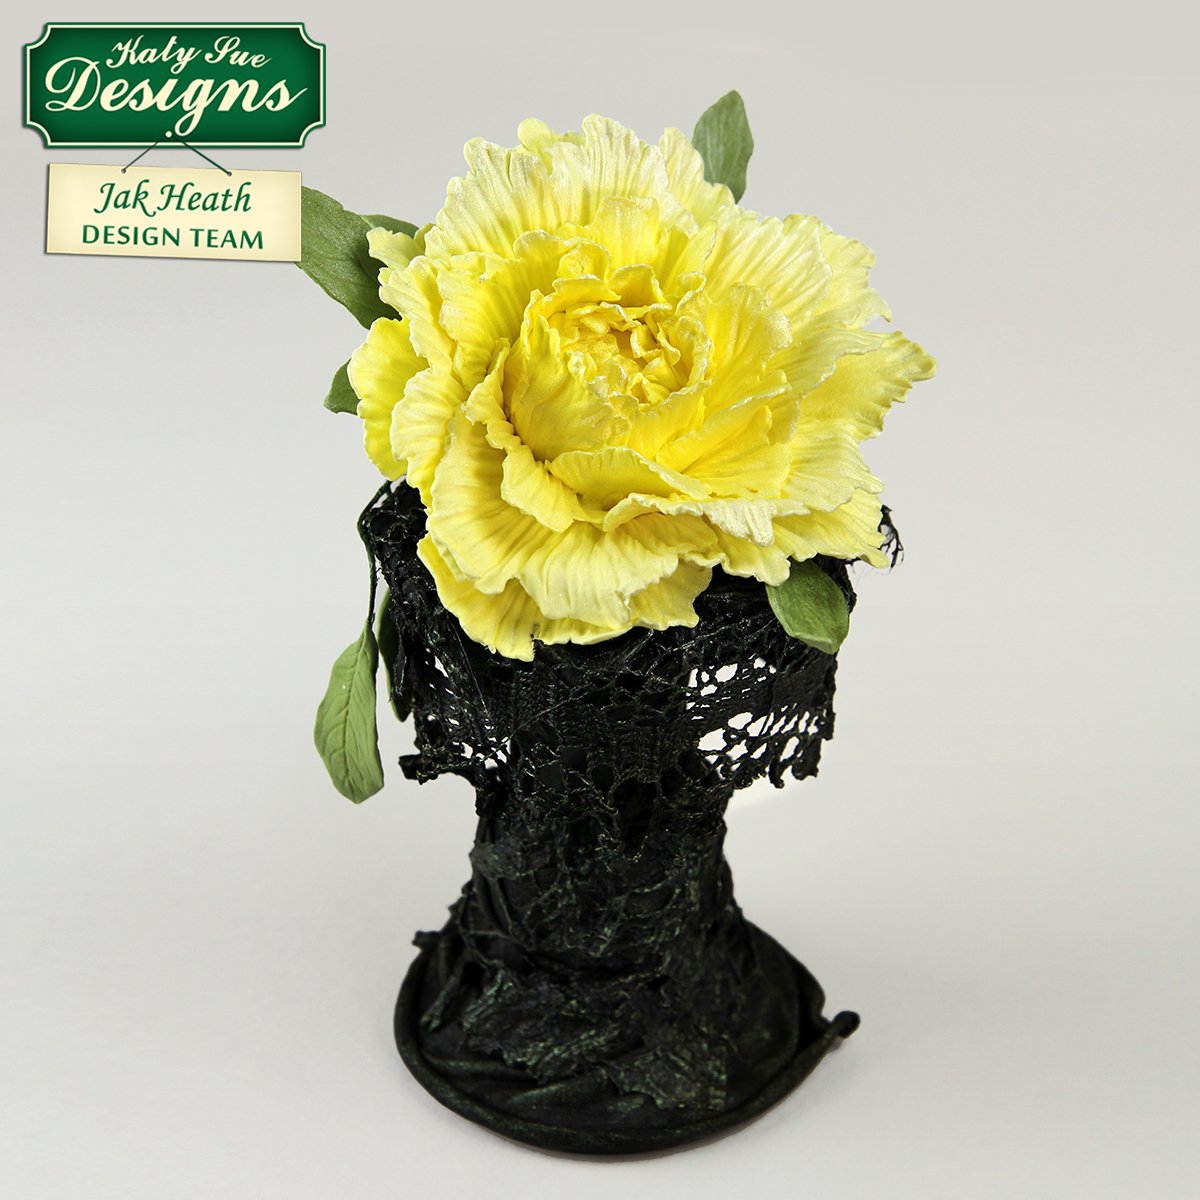 C - Craft Idea using the Flower Pro Peony Leaves Mould